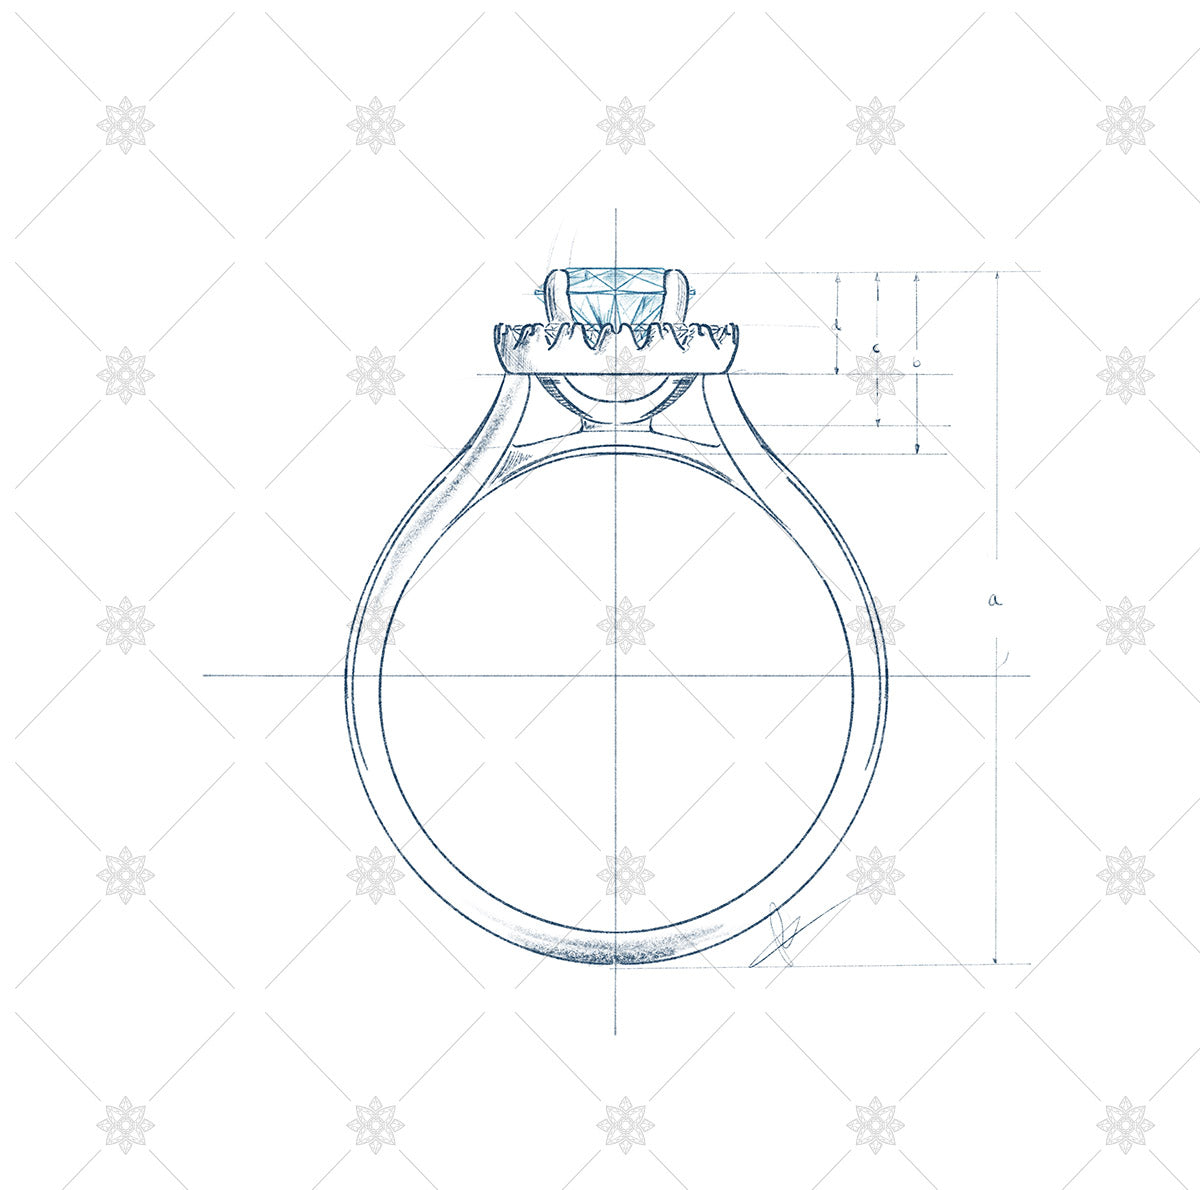 Solitaire Diamond Ring Sketch with measurement guides - JG4087